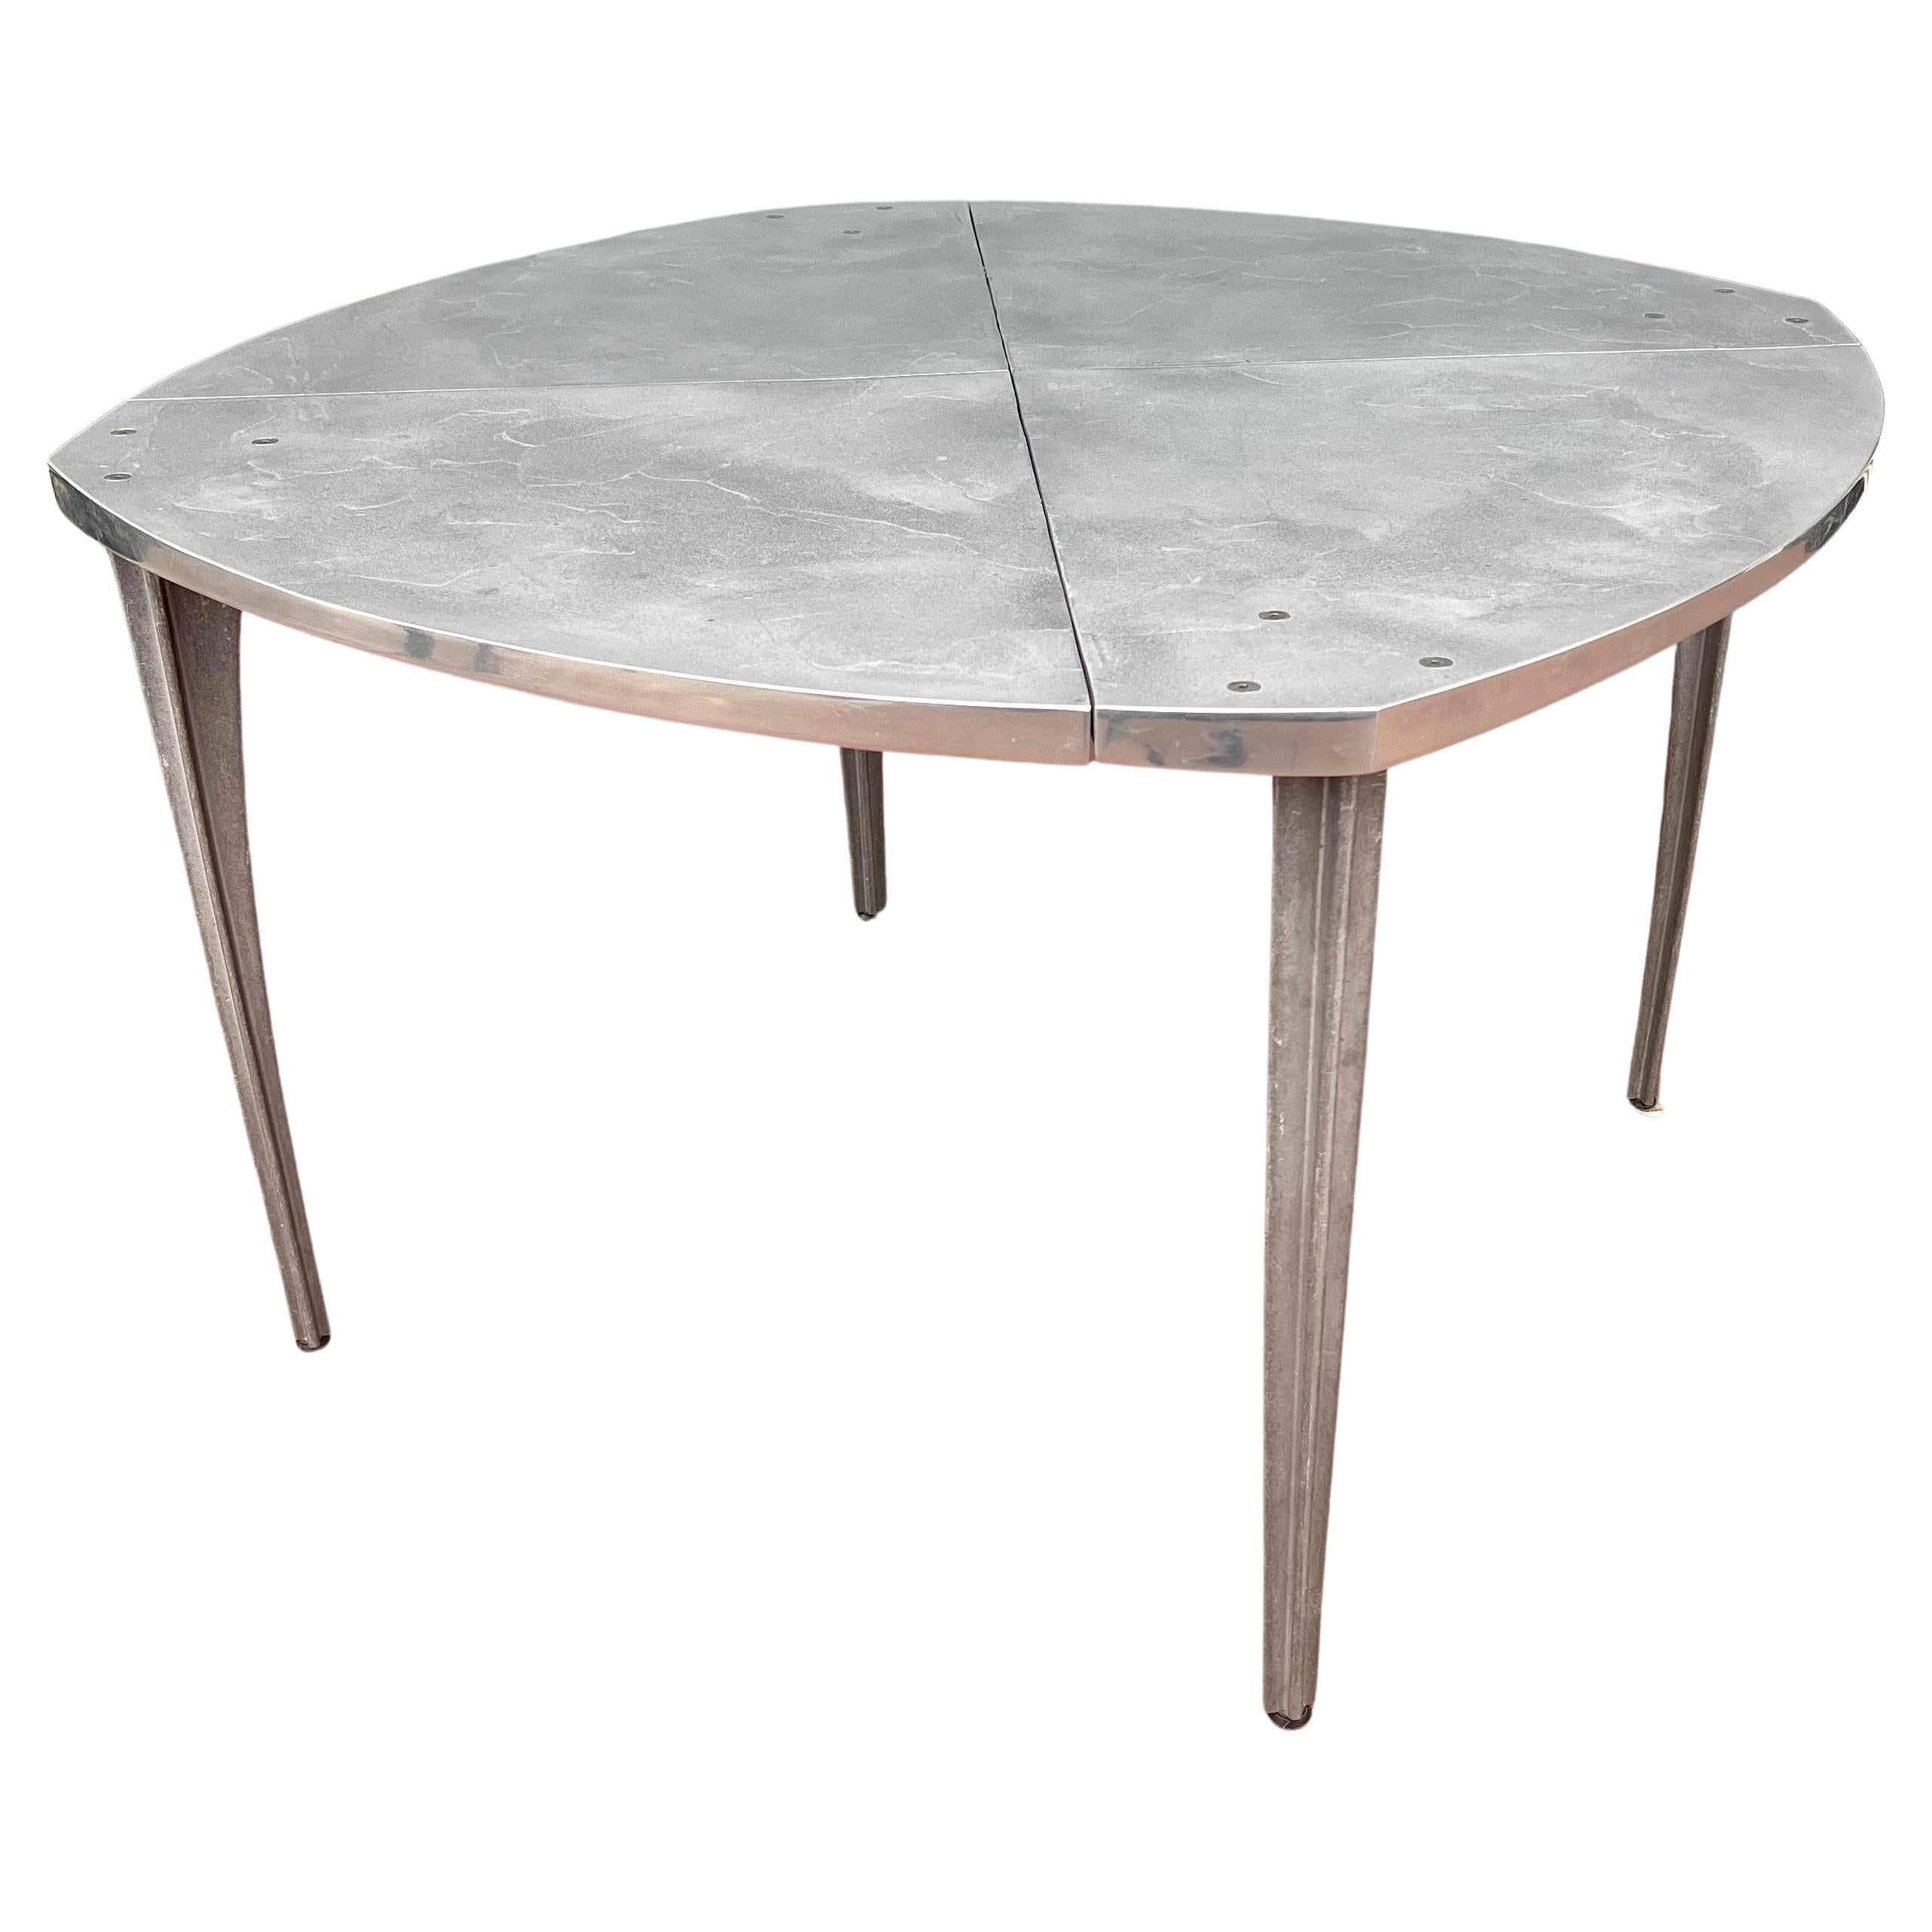 Rare dining table by Robert Josten solid raw patinated steel top with cast aluminum legs circa the 1980s, all in original condition very unusual to see this table, his designs are scarce and this one is very rare and perfect for a dining table.